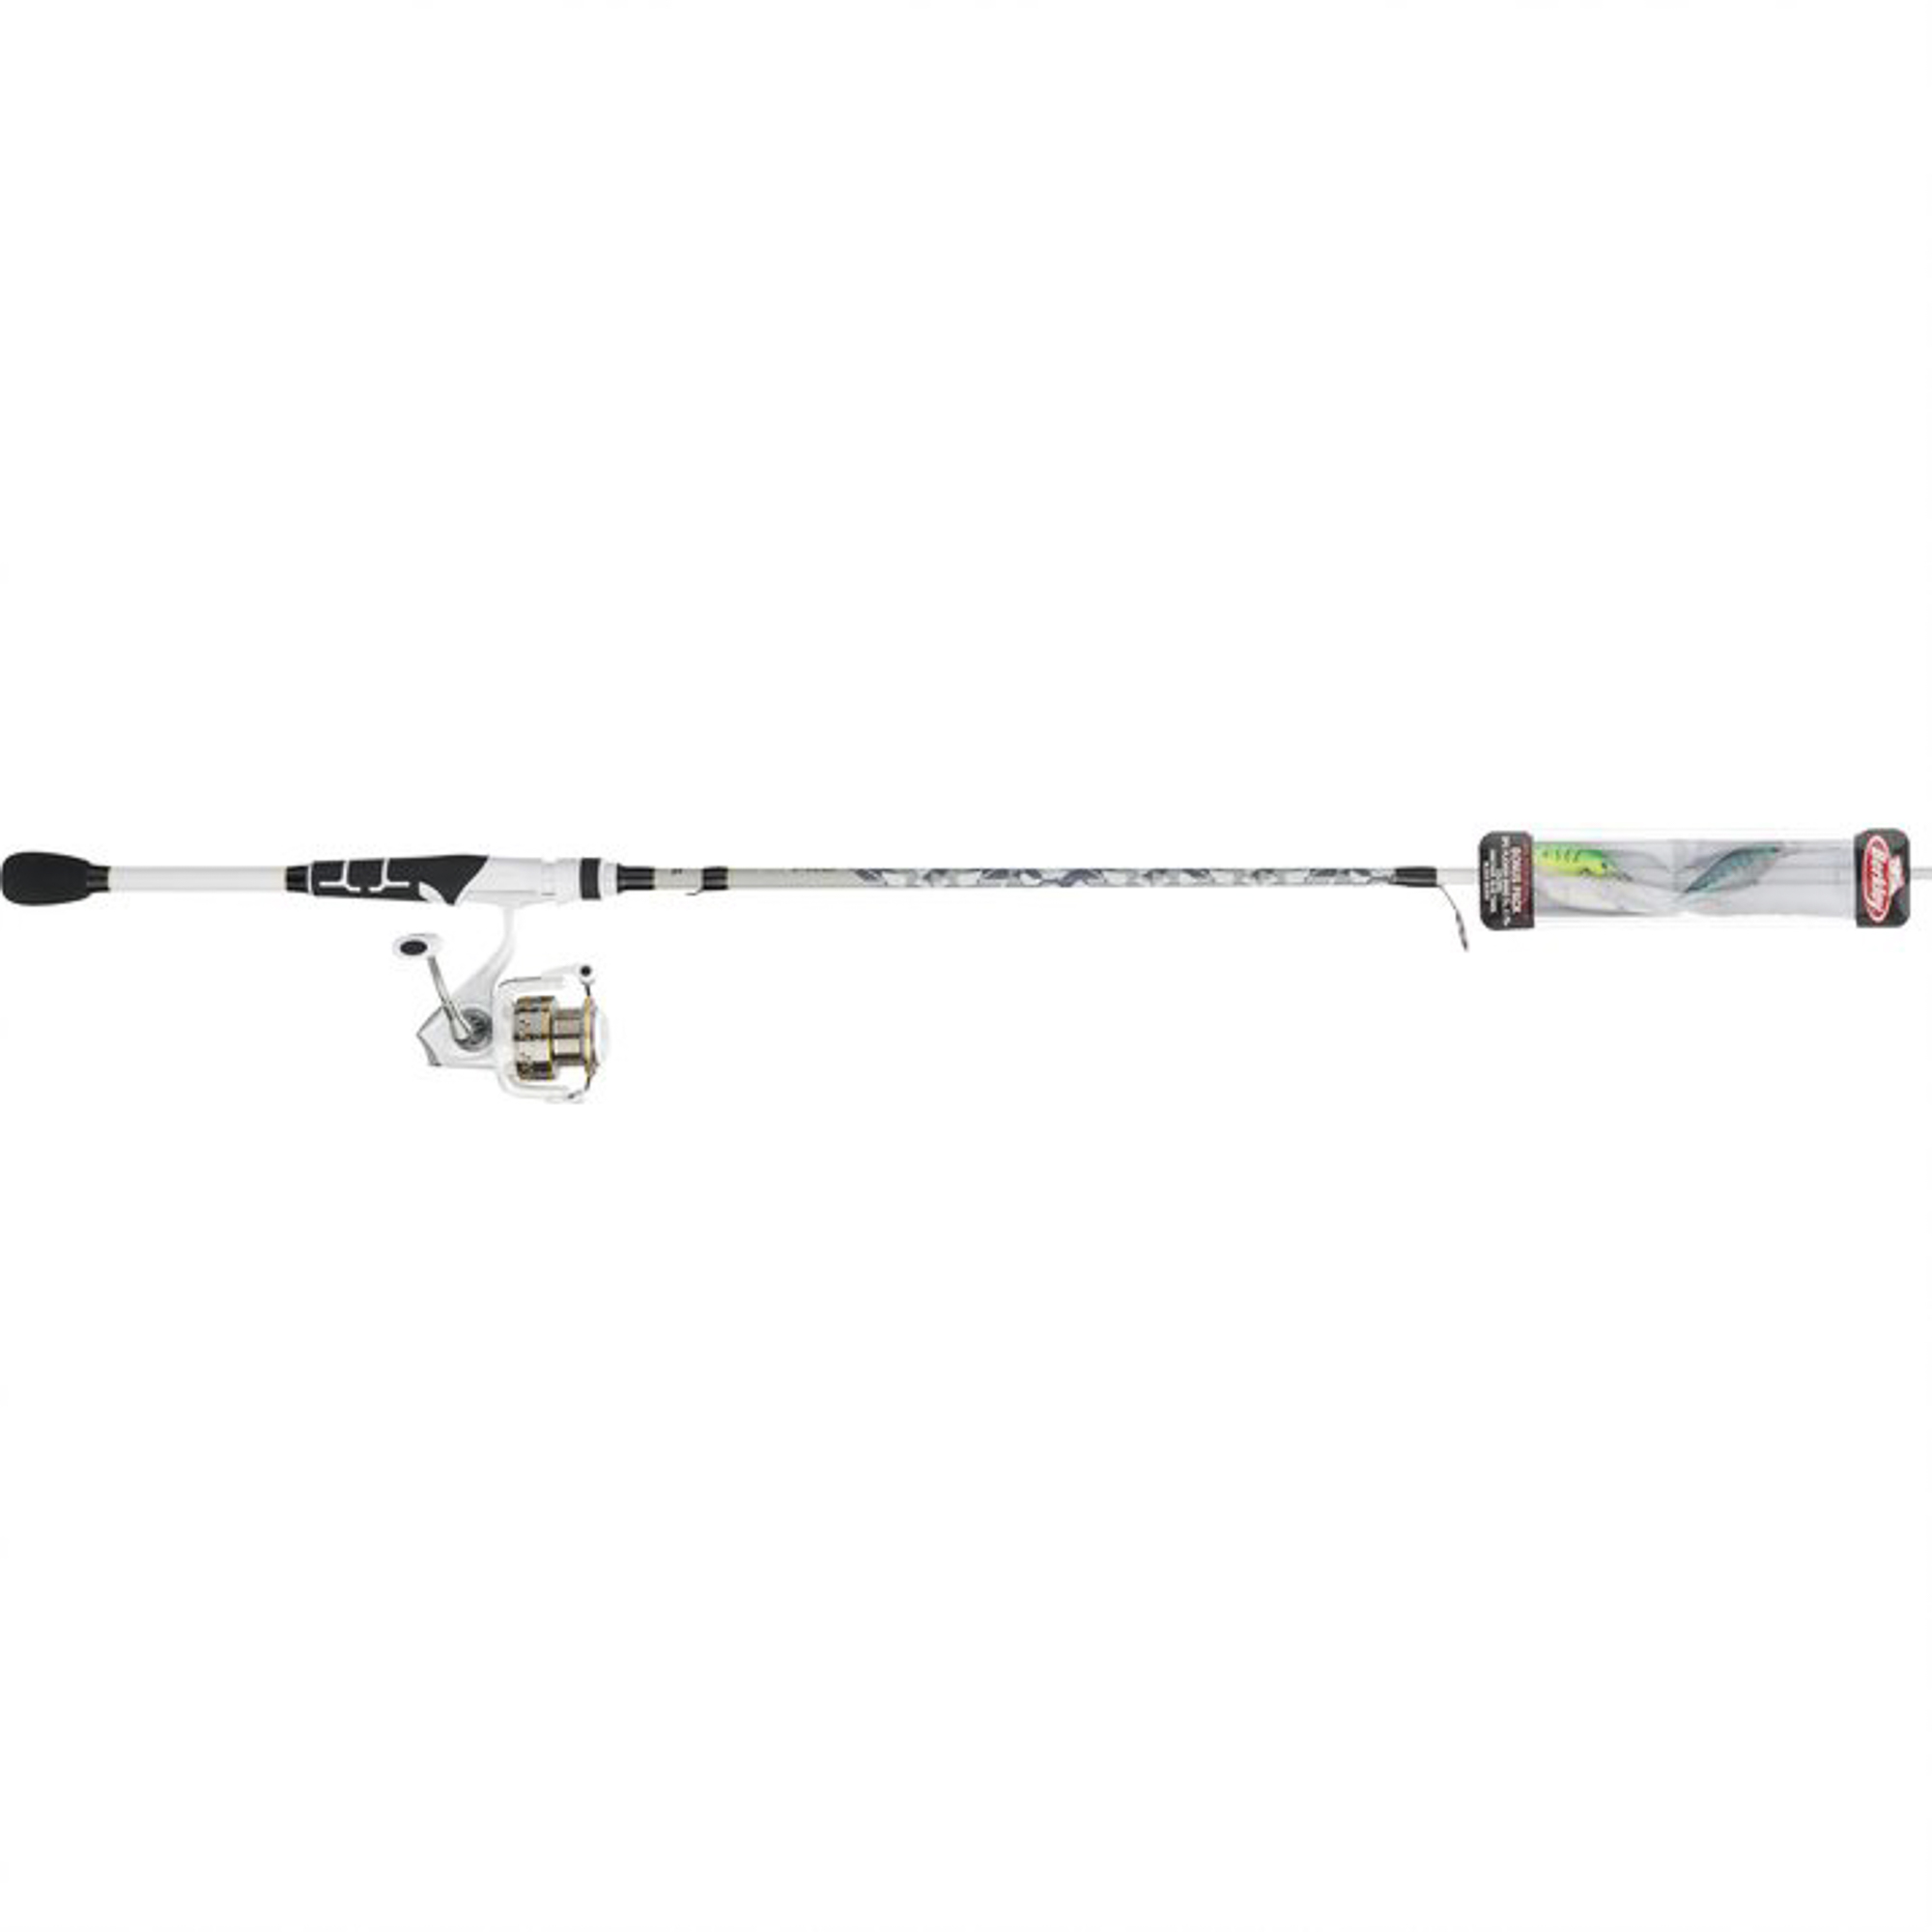 Abu Garcia Max Pro Spinning Rod and Reel Combo with Berkley Flicker Shad Bait Kit - image 2 of 6